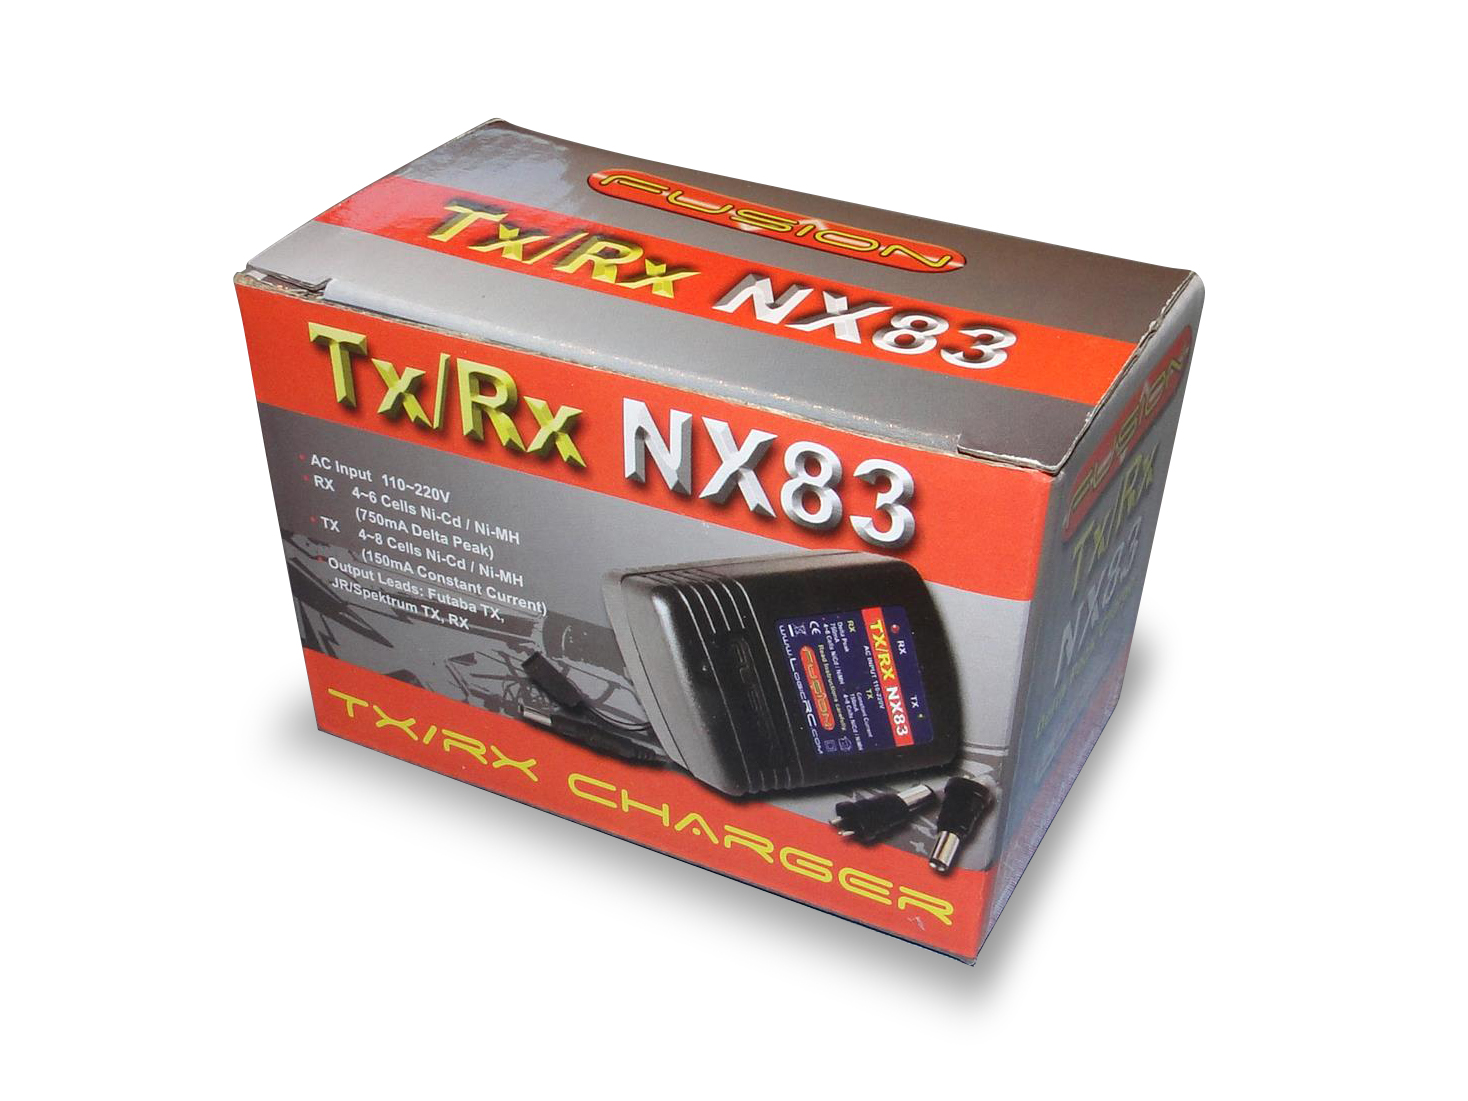 Fusion NX83 Tx/Rx AC Charger